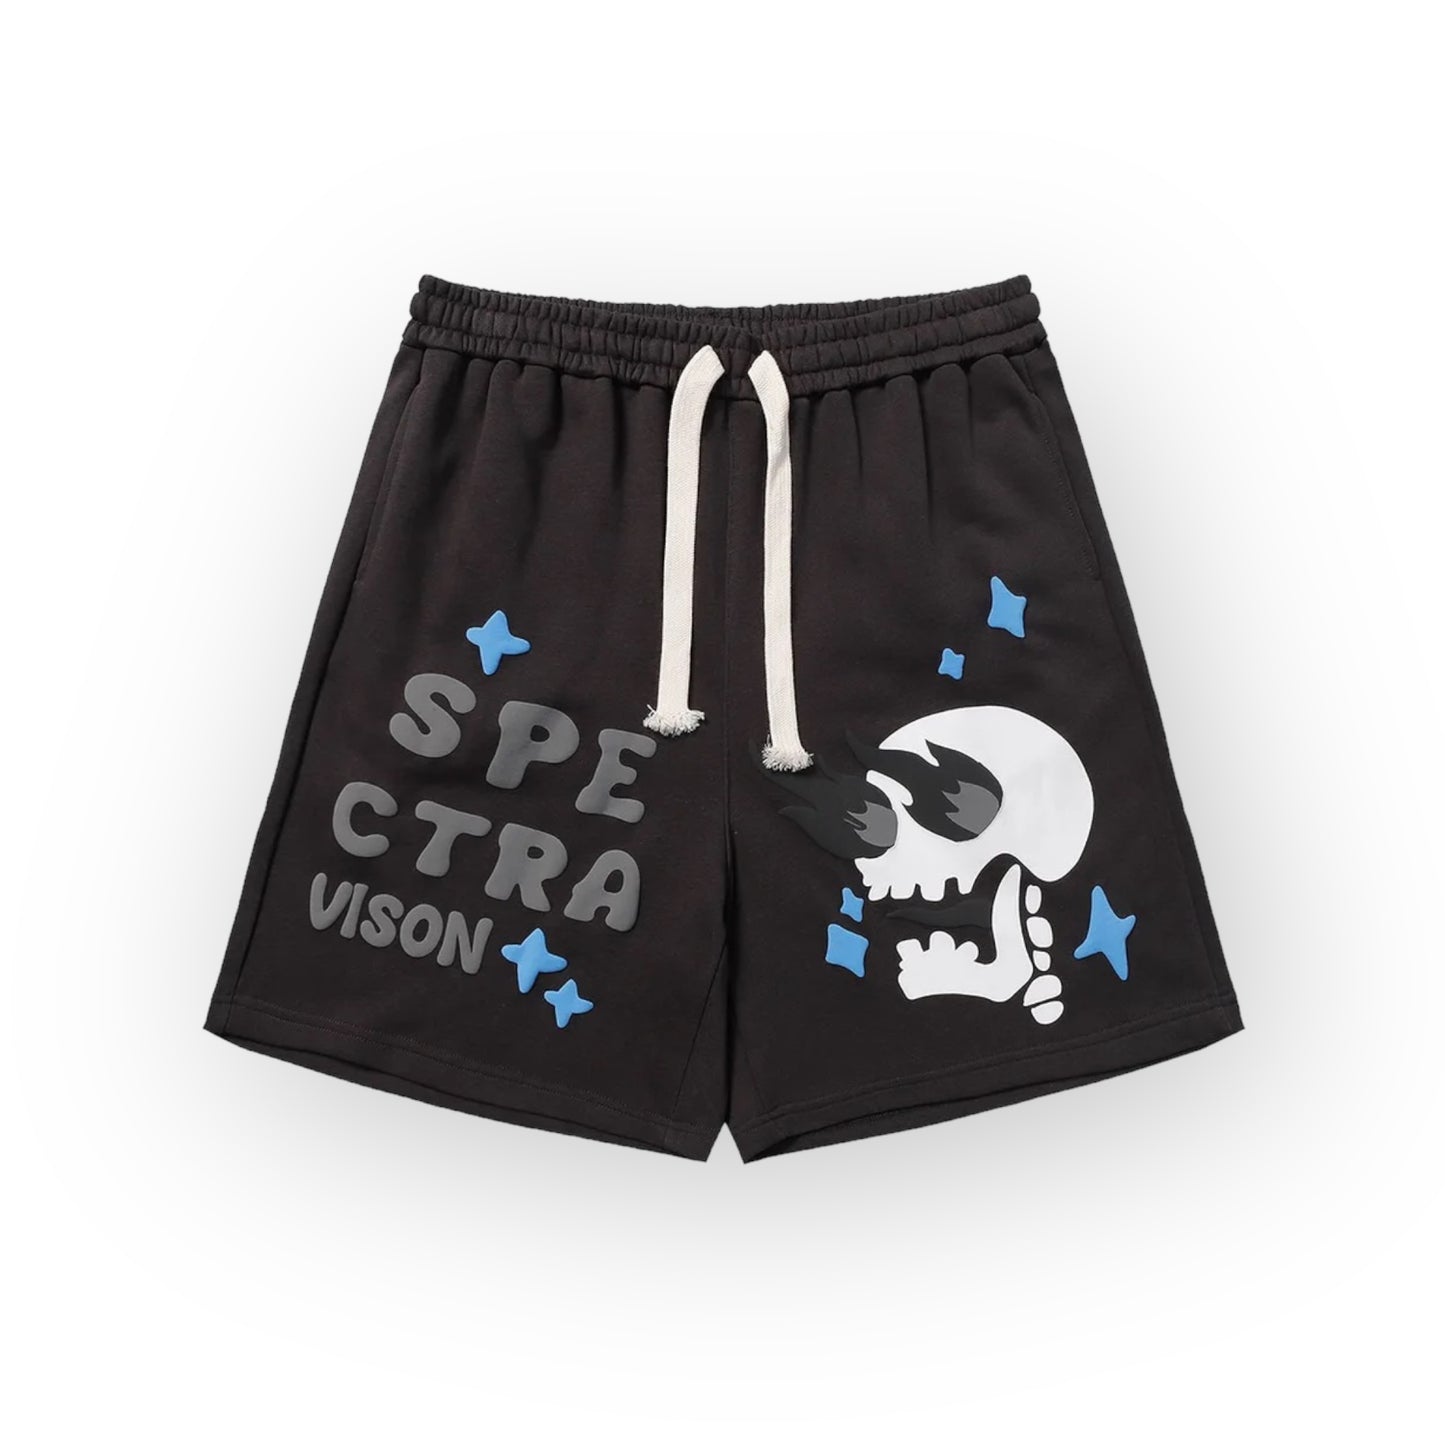 Aolamegs Skull Graphic Letter Print Shorts